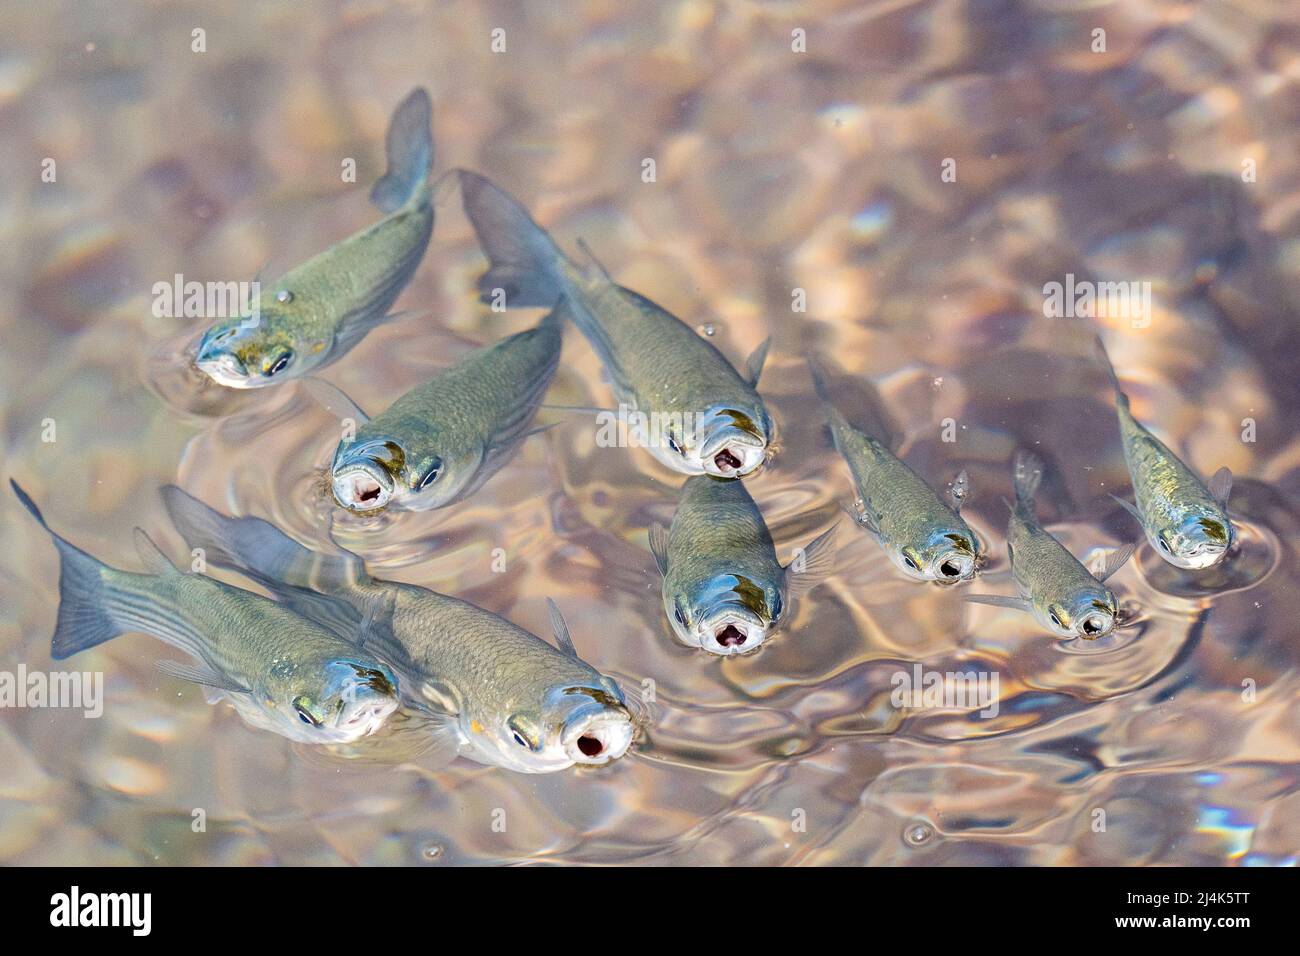 School of thicklip grey mullet, Chelon labrosus, a coastal fish of the family Mugilidae, search food at the surface, in Atlantic Ocean. Stock Photo